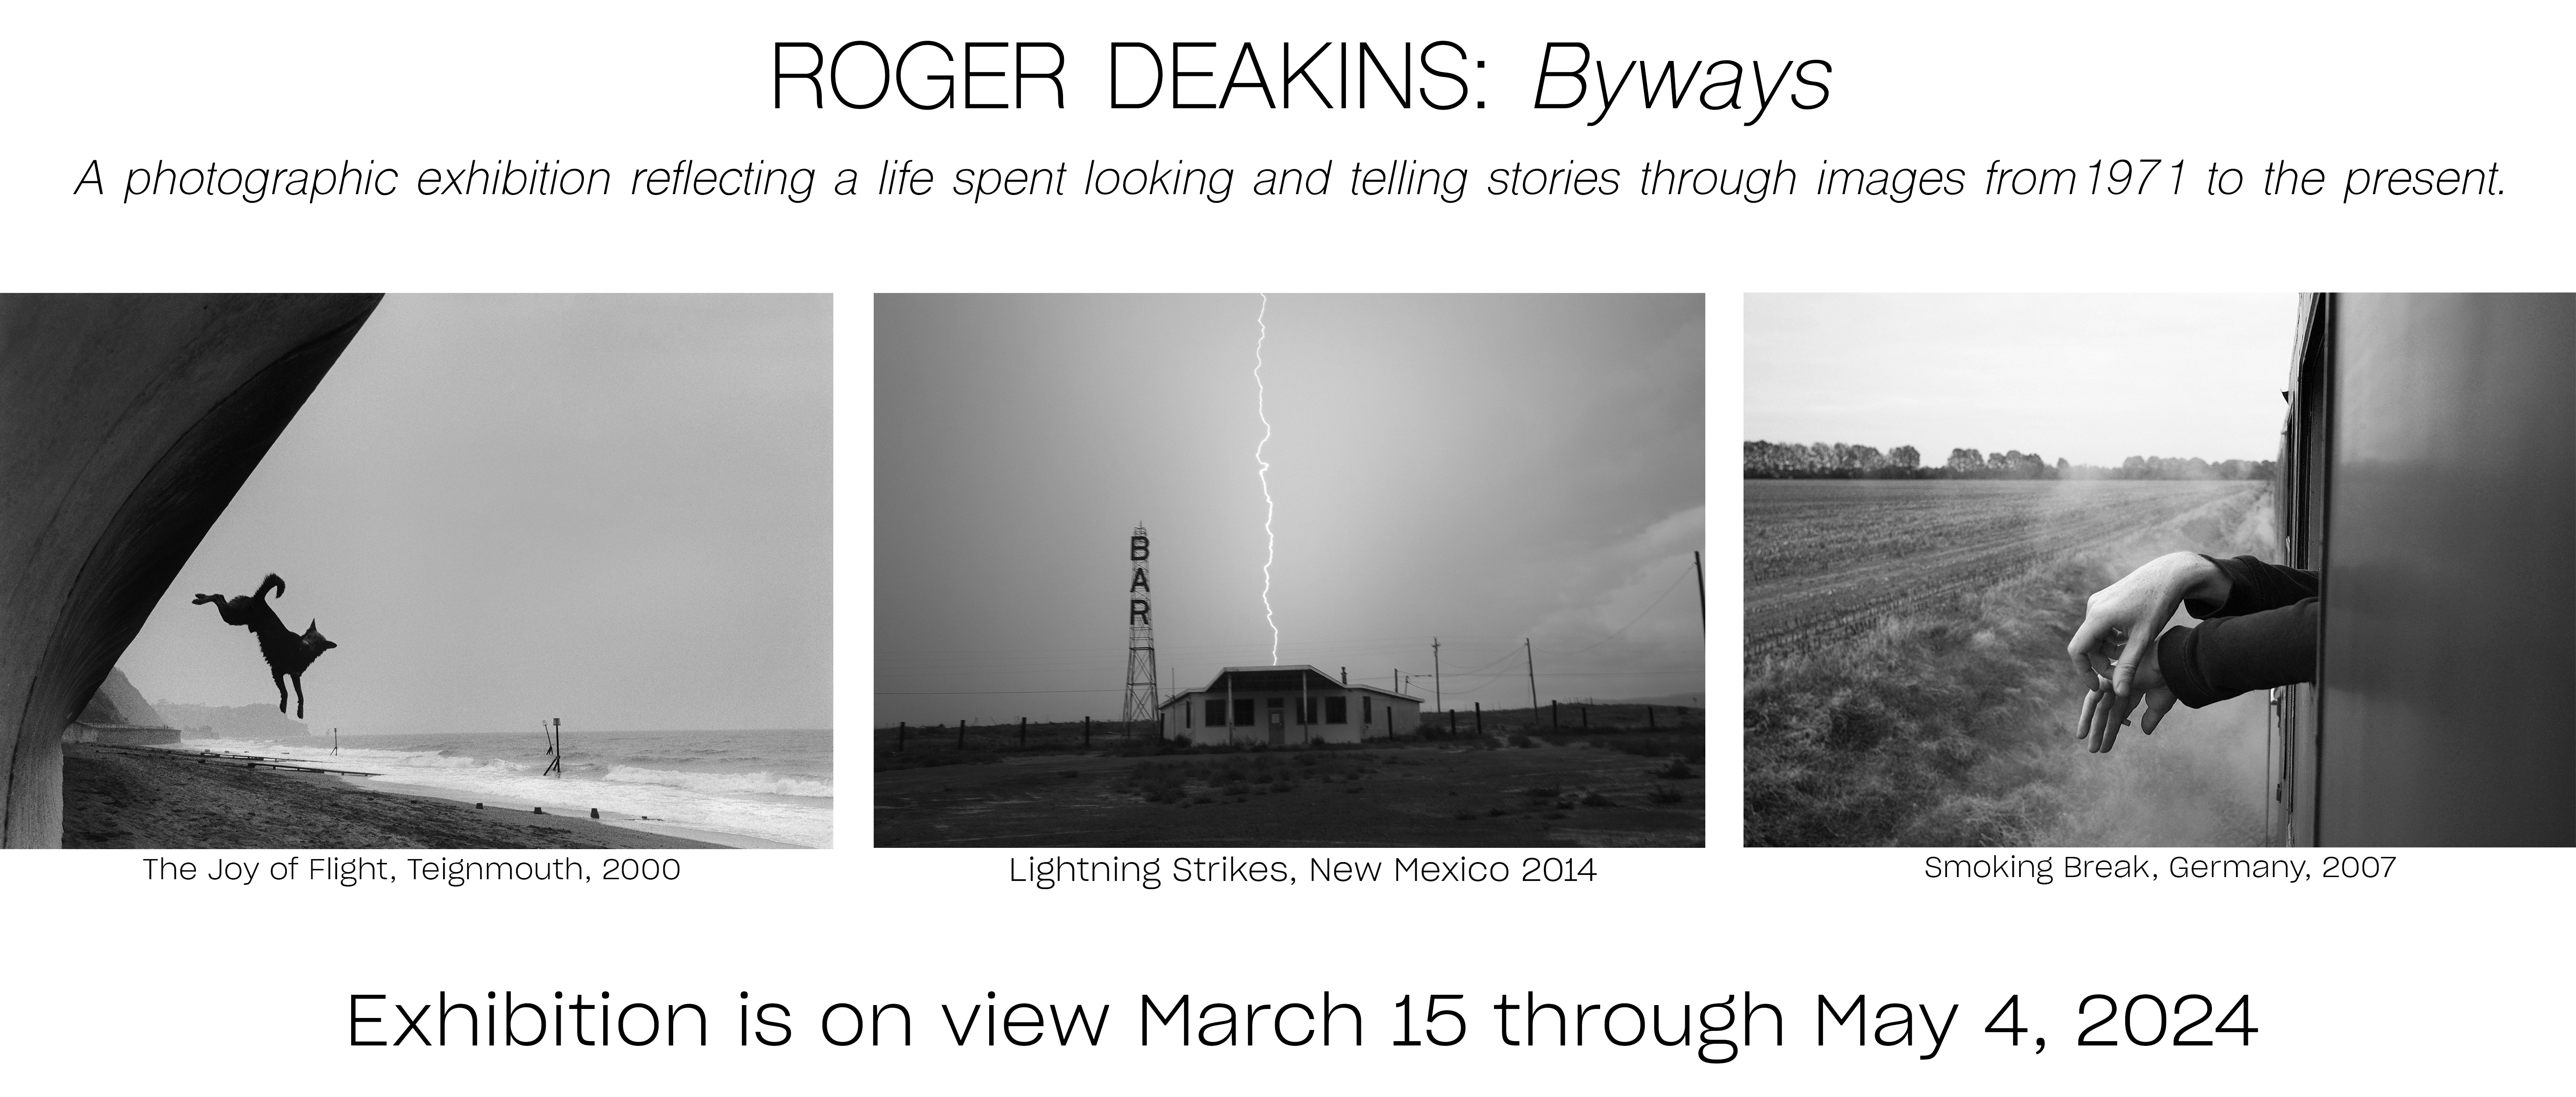 Roger Deakins Byways on view through May 4, 2024